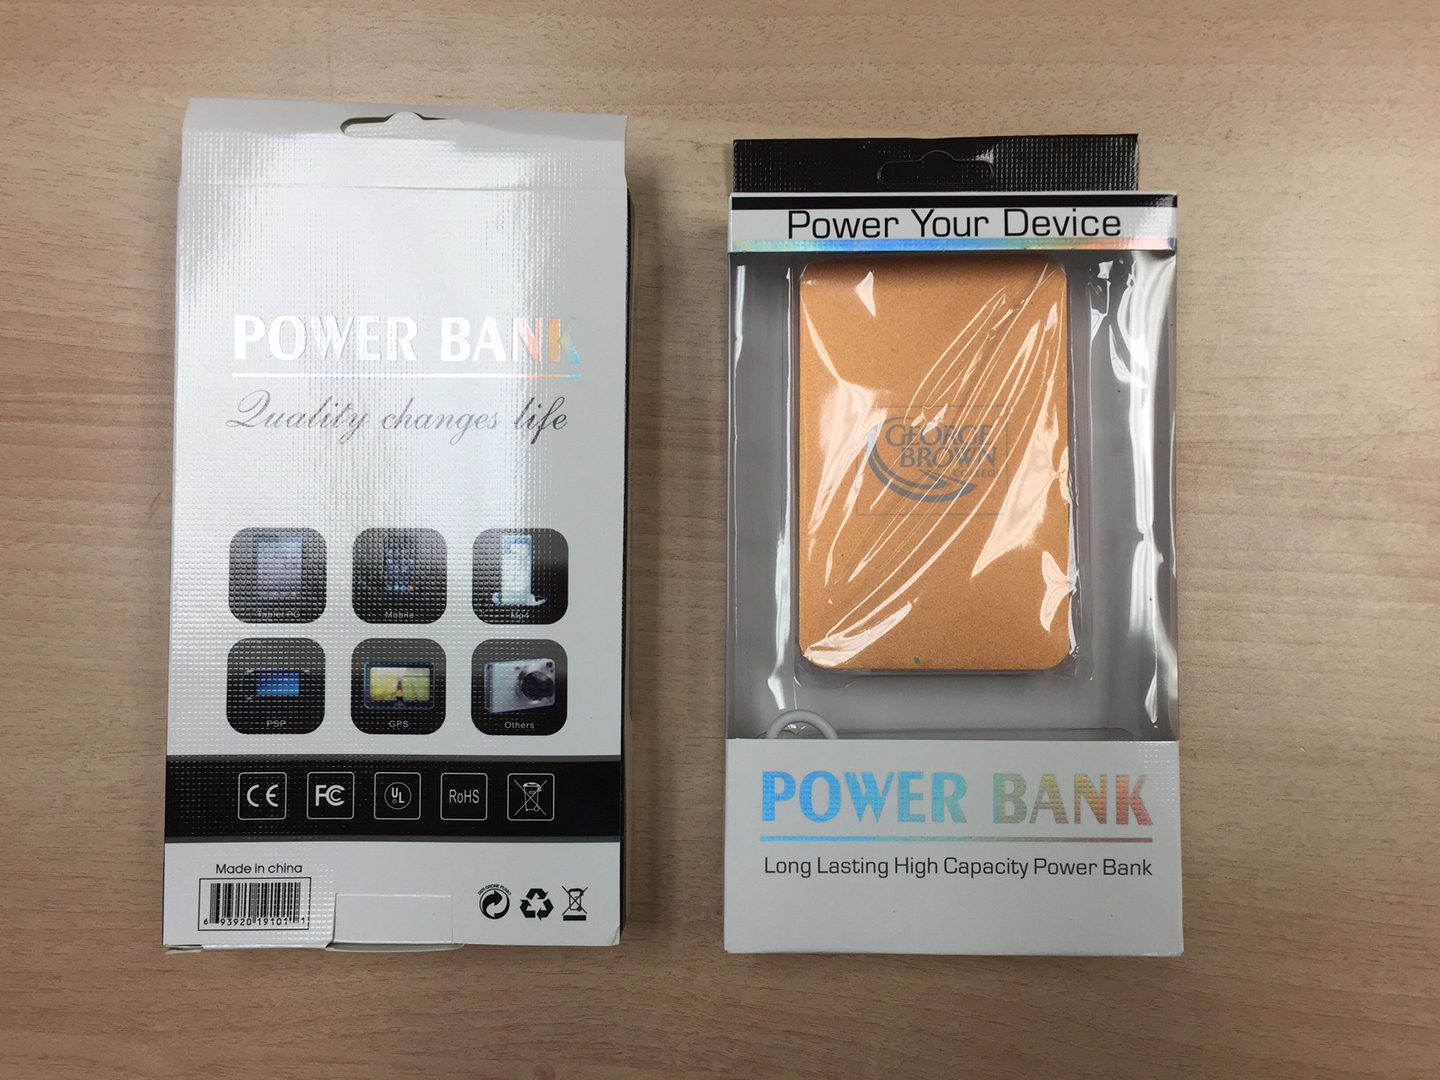 A Power Bank in a Plastic Case Beside a Box